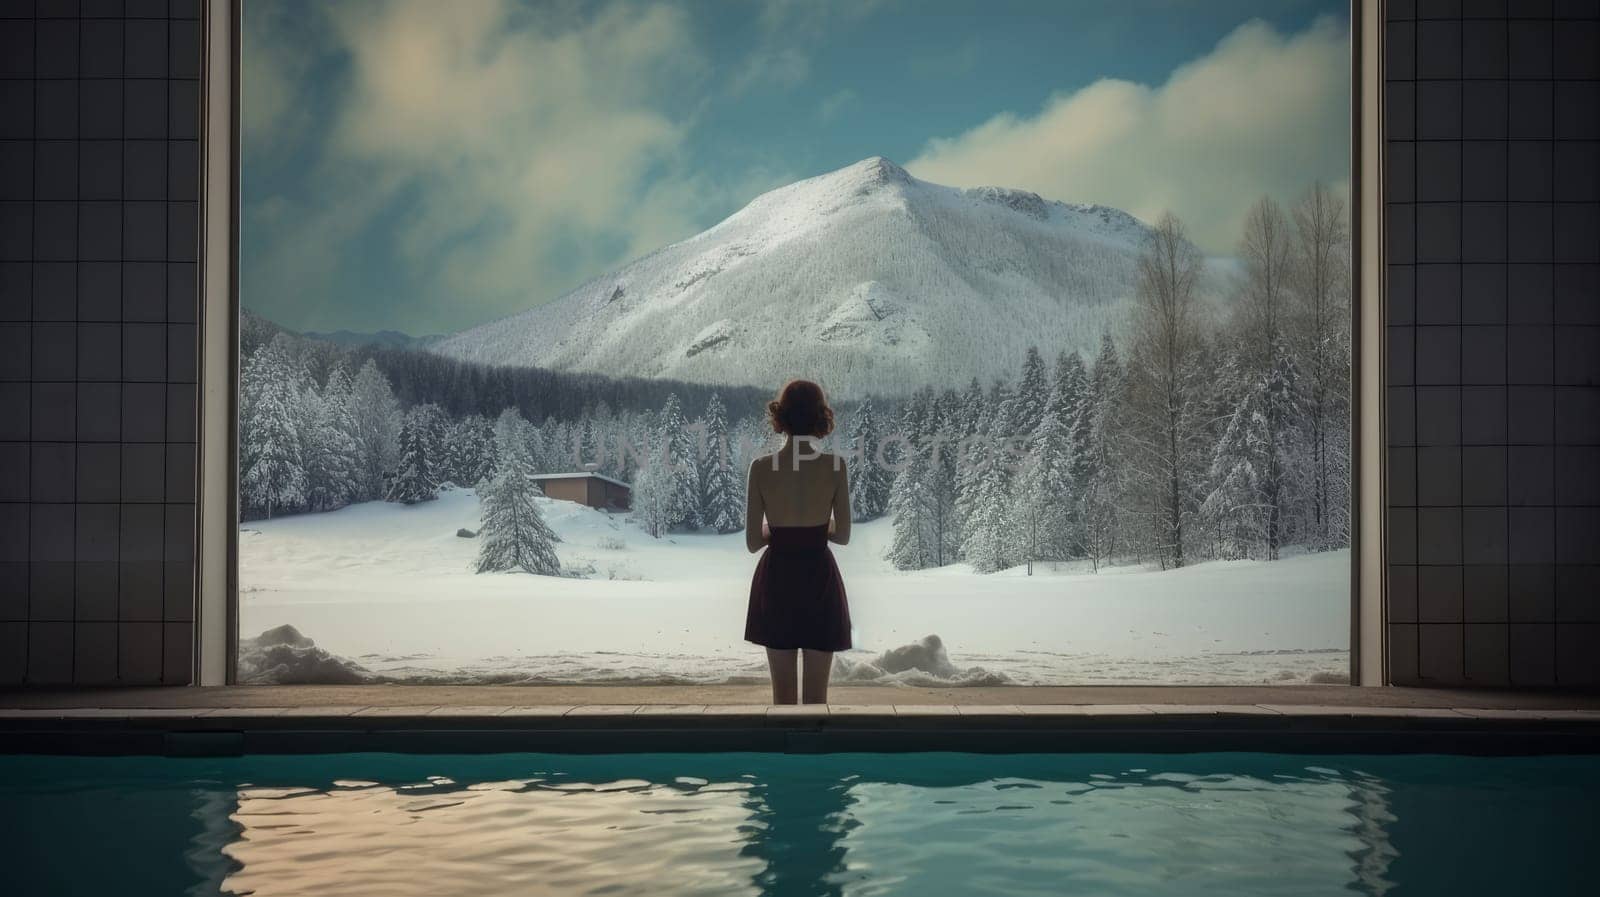 A girl and a pool among the snow in an ecological chalet hotel at an alpine ski resort overlooking a snowy landscape and mountains. by Alla_Yurtayeva